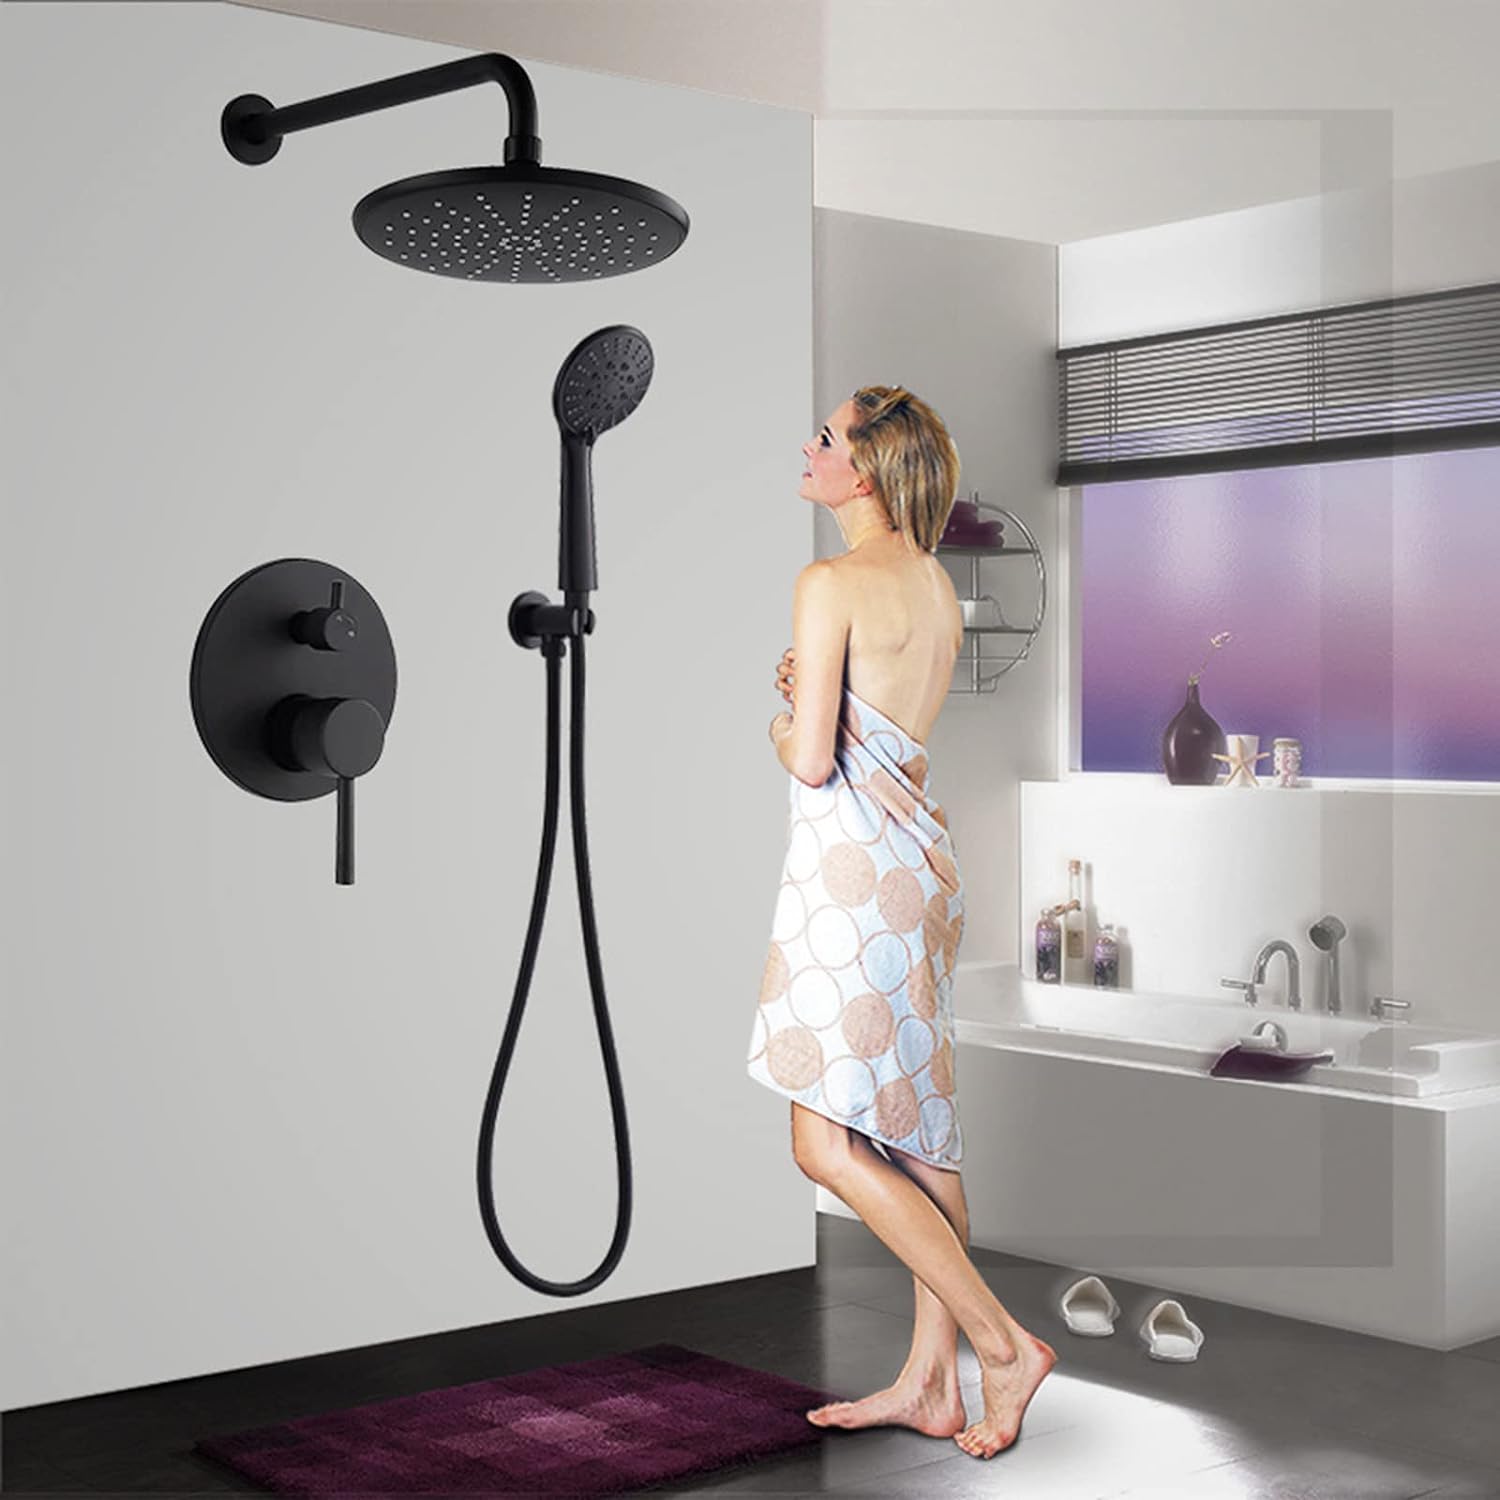 Buy Stainless Steel Wall Mounted Two-Function Square Rain Shower Set - P05014BN | Shop at Supply Master Accra, Ghana Shower Set Buy Tools hardware Building materials